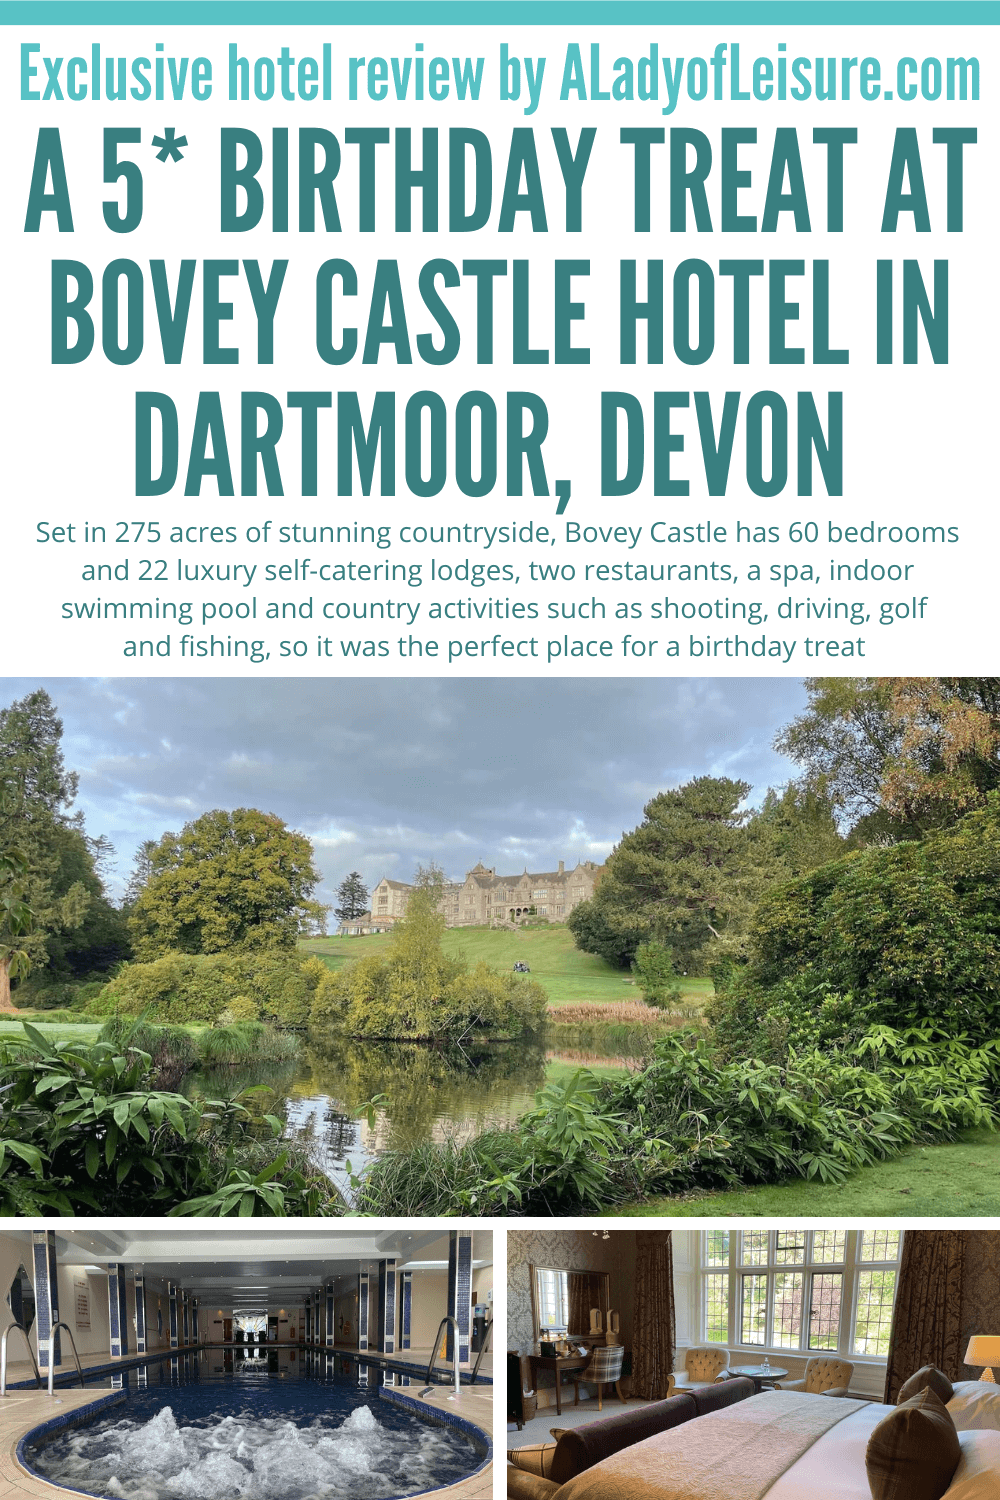 bovey castle hotel review pinterest pin